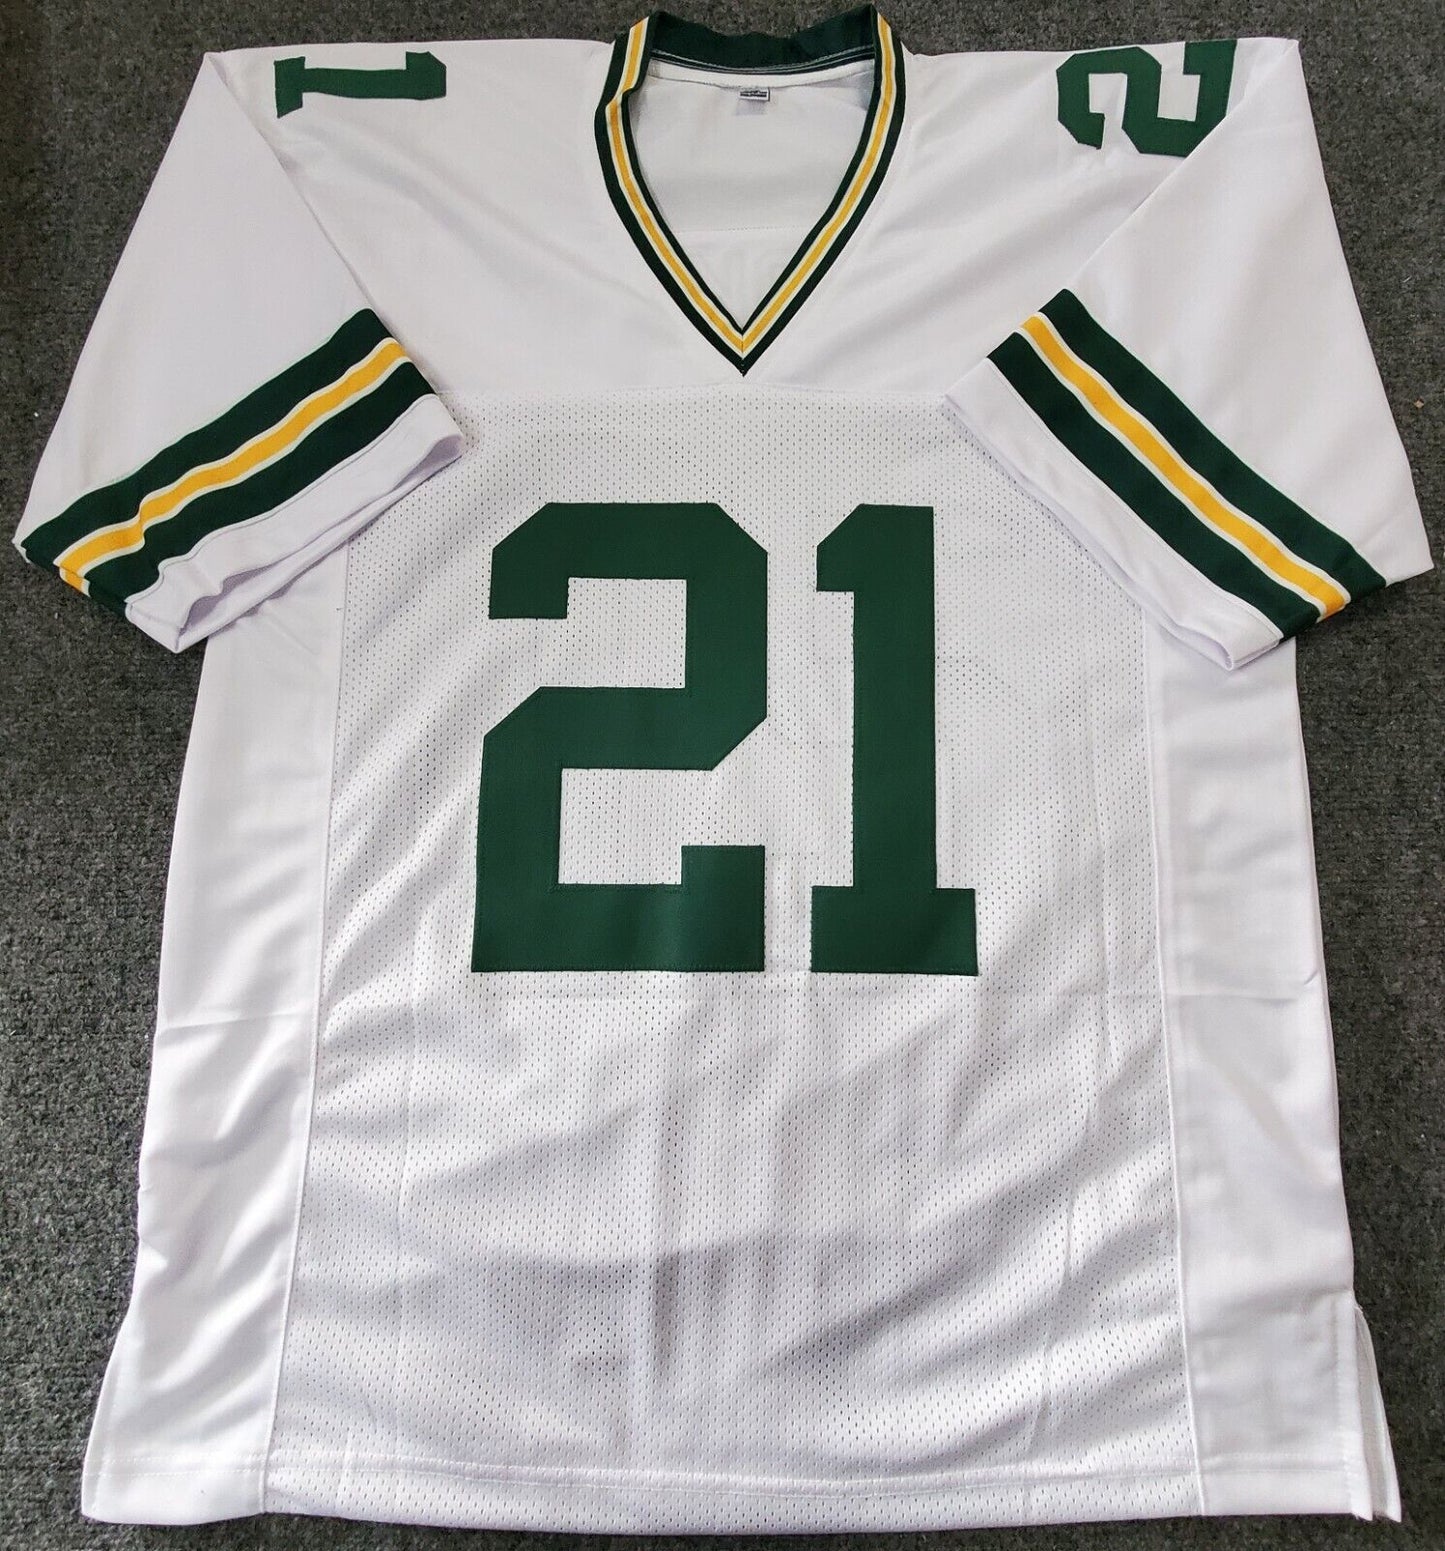 MVP Authentics Green Bay Packers Eric Stokes Autographed Signed Inscribed Jersey Jsa Coa 139.50 sports jersey framing , jersey framing